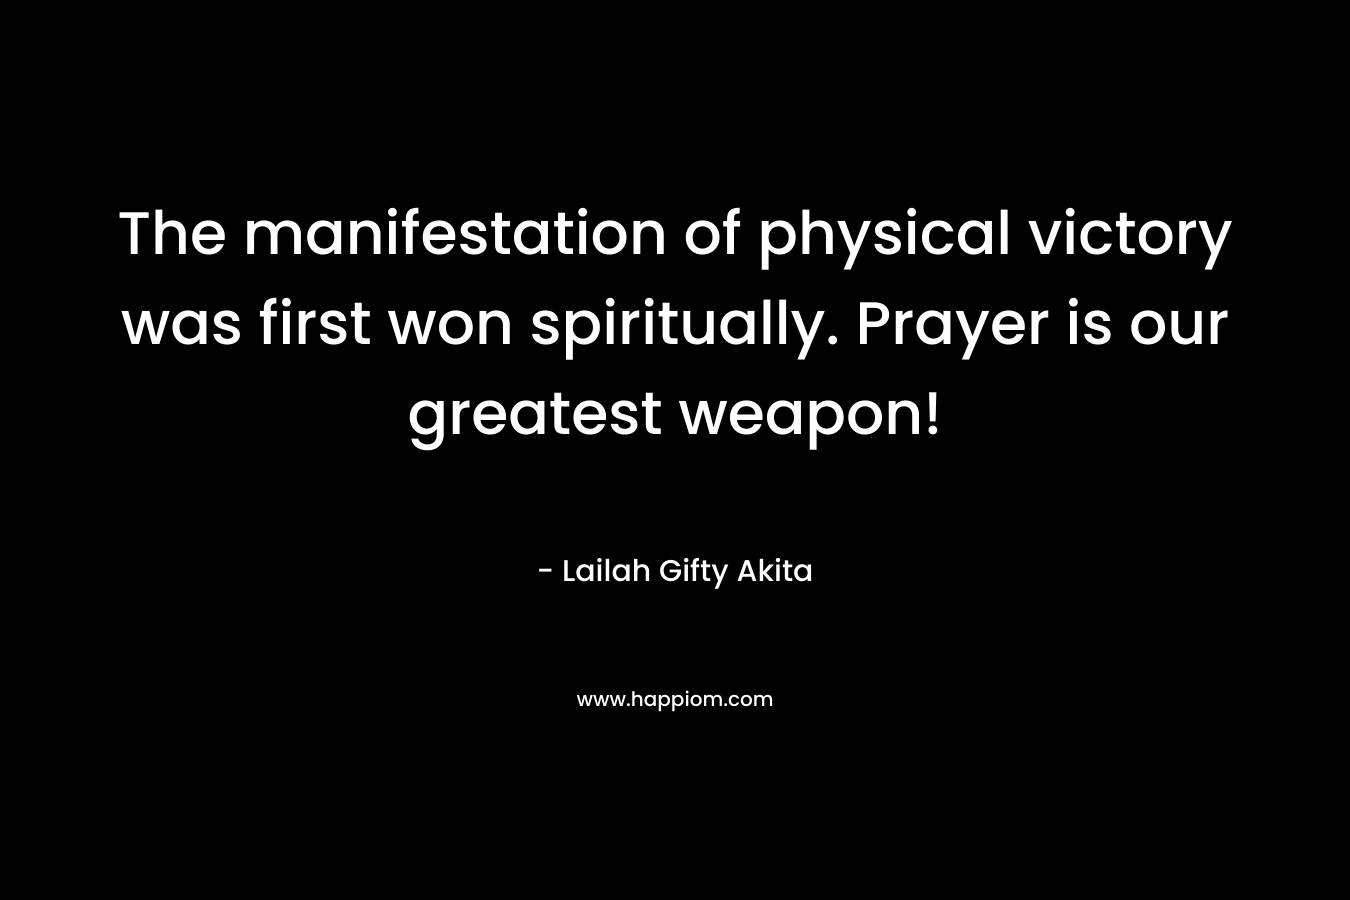 The manifestation of physical victory was first won spiritually. Prayer is our greatest weapon!